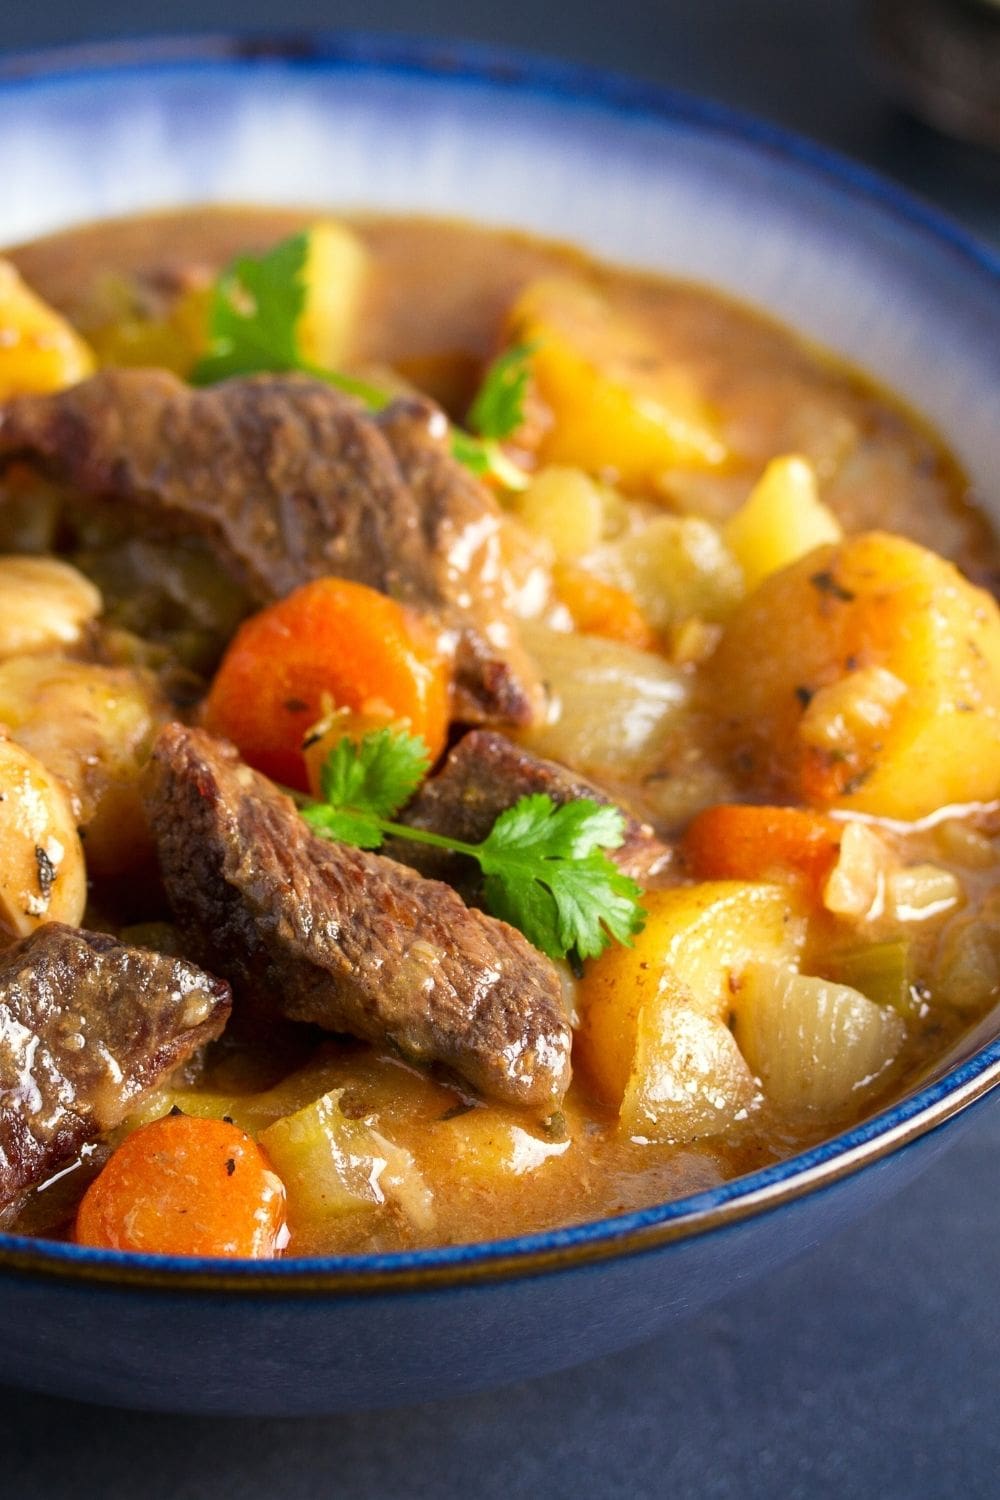 Stewed meat with carrots, potatoes and spices